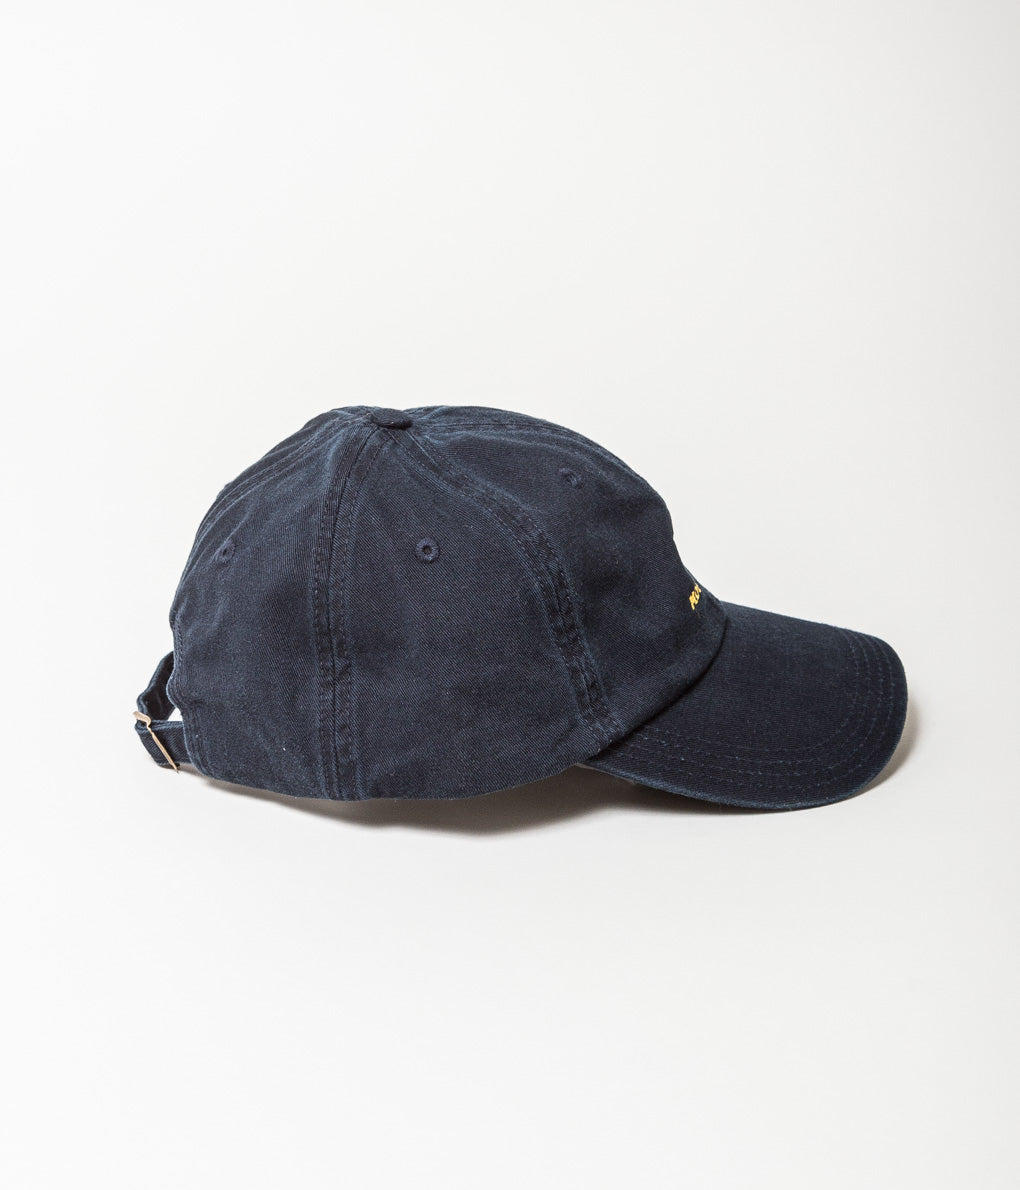 OLD SOLDIER "BOAT CLUB CAPS" (NAVY)